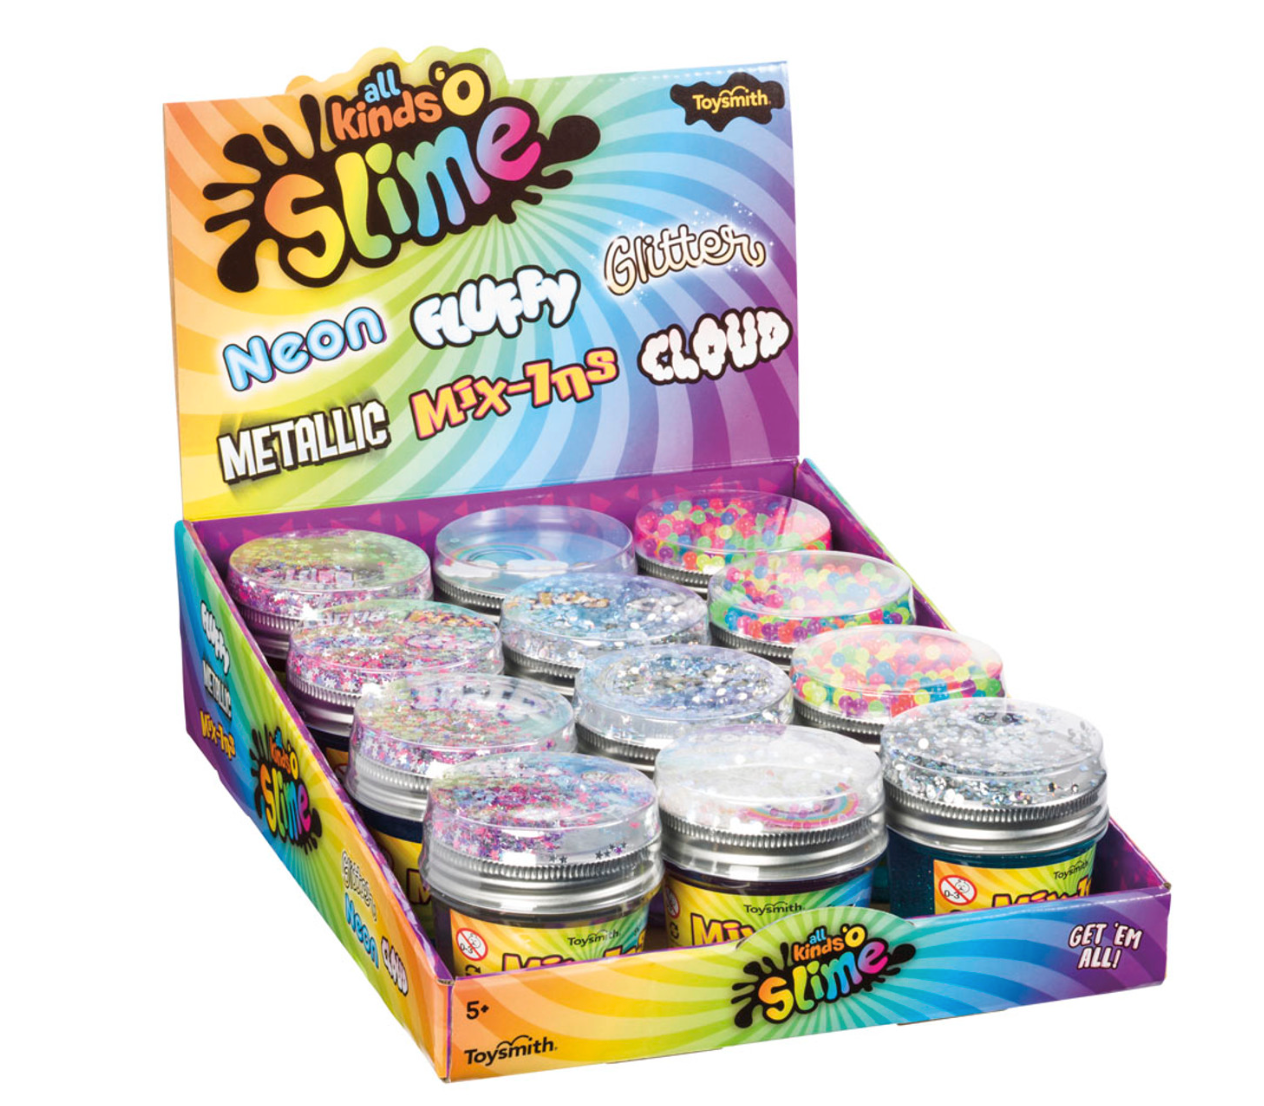 Toysmith Mix-Ins Glitter Slime with Confetti, 5.5 Ounces, Kids Unisex